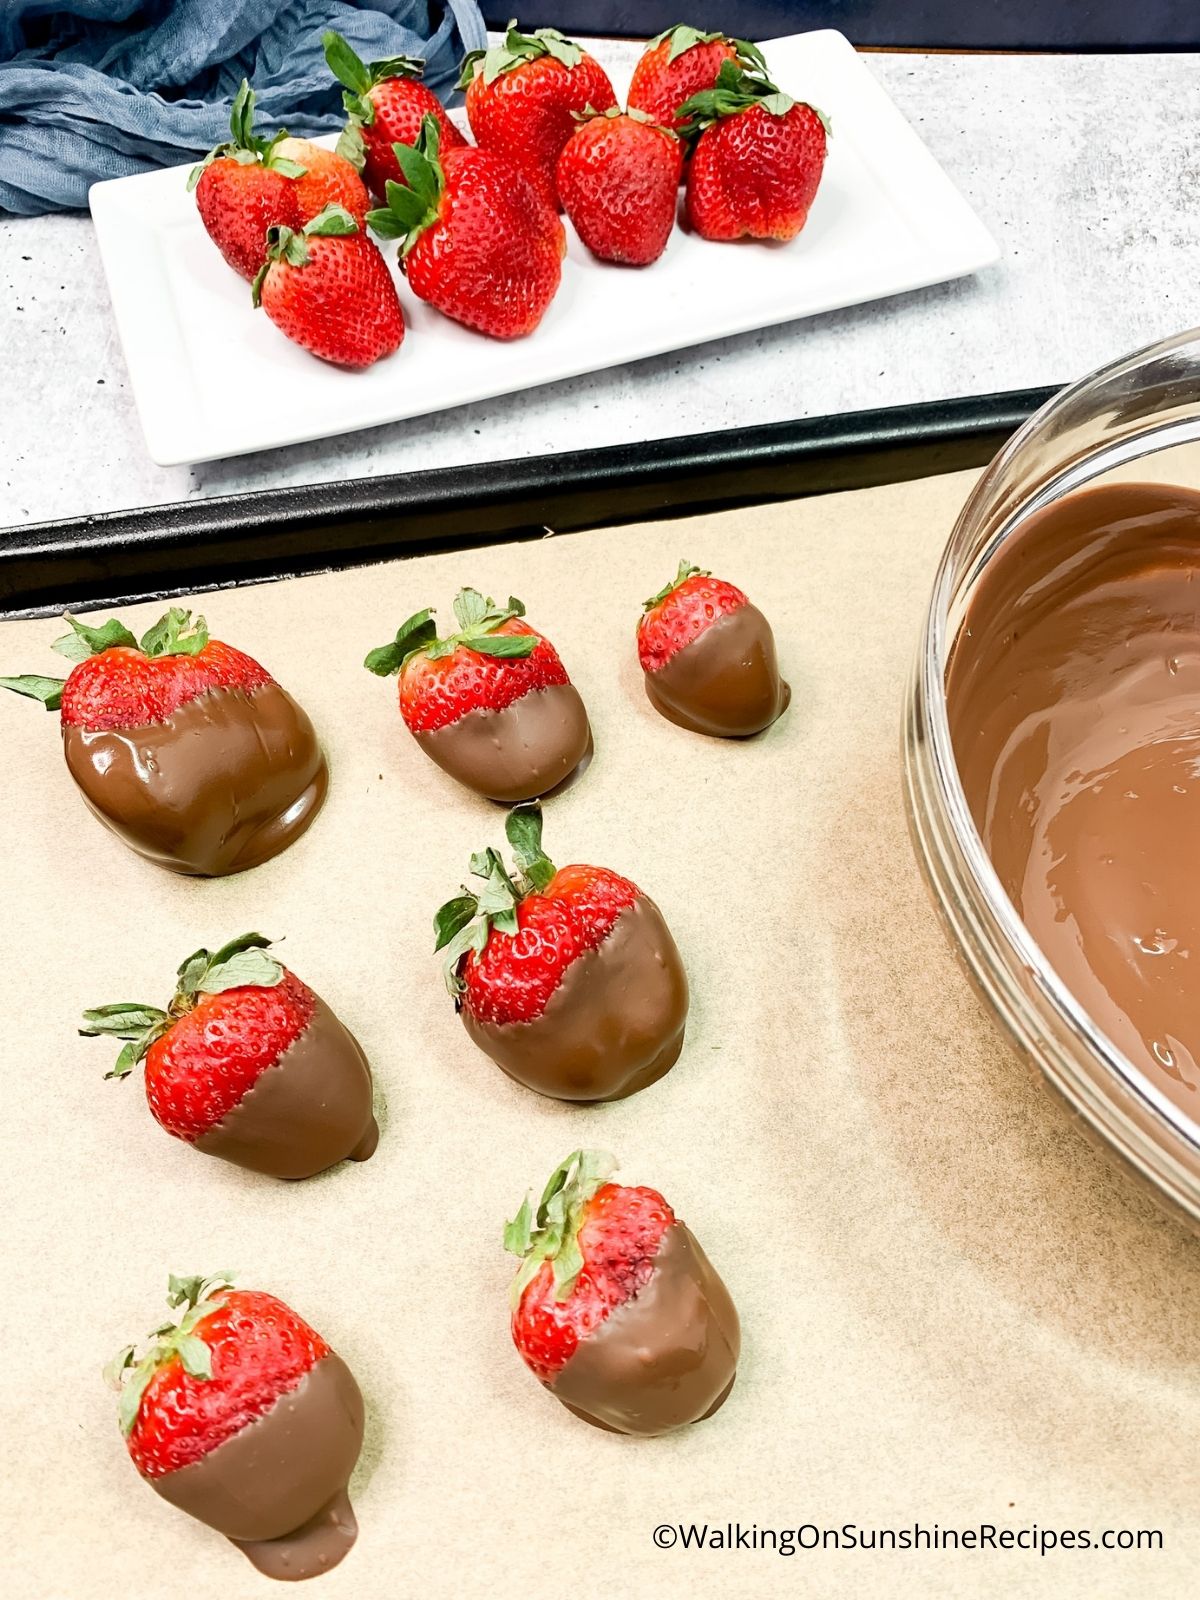 Let strawberries dry on parchment paper.